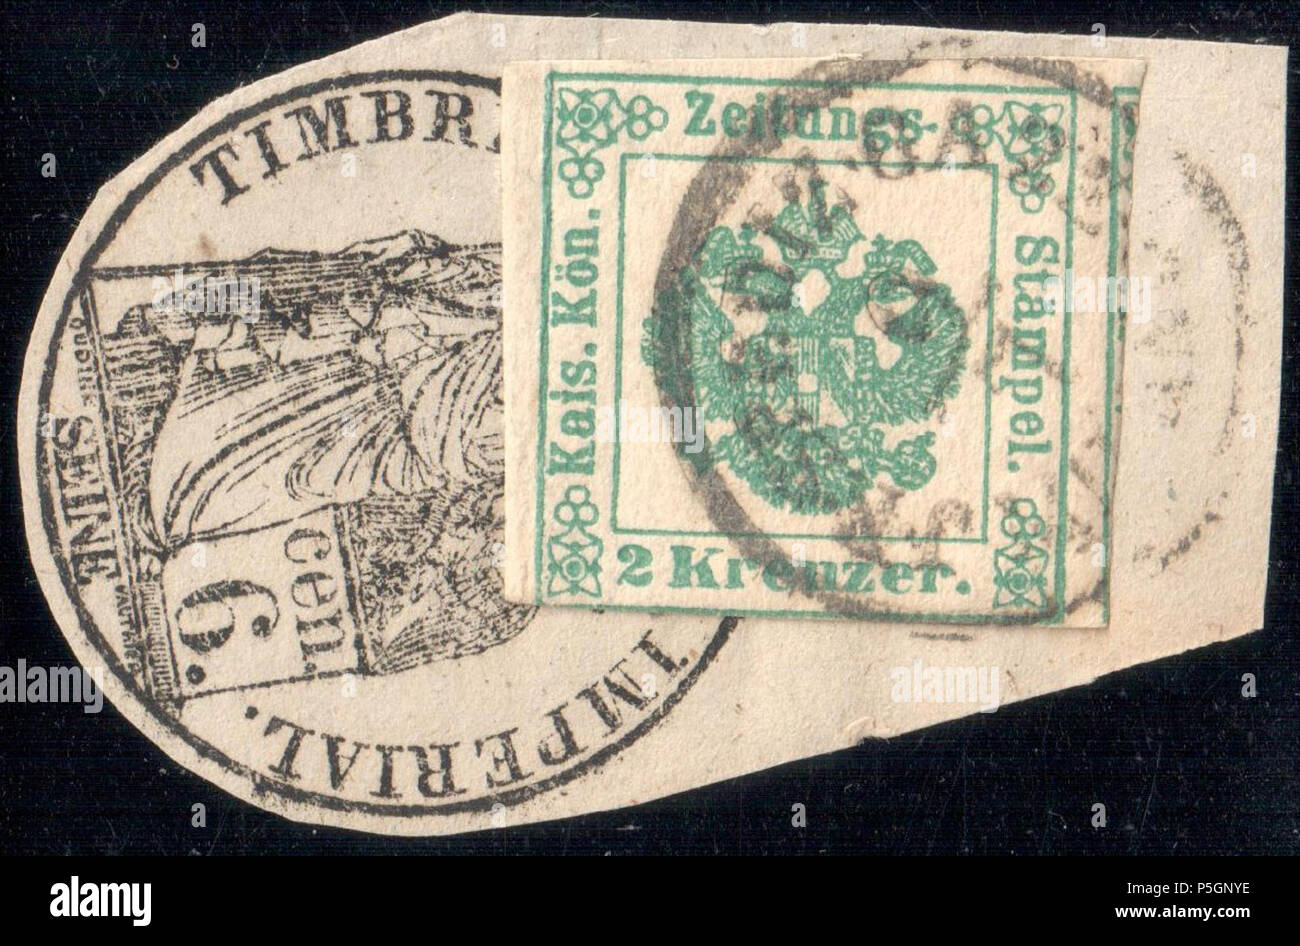 N/A. English: Austria 1853 Ib green on fragment used in MILANO with French signet. Newspaper tax stamps were affixed to newspapers coming into the Austria empire from abroad. This is an example of a newspaper fragment from France to Milan. Lombardy-Venice postmark of the post office newspaper section 'I.R.SPEDIZ(IONE) GAZZ(ETTE) MILANO'. Müller postmark: 362 type RS-f . 1853. Post of the Austrian Empire 153 Austria 1853 Ib green MILANO signet Stock Photo